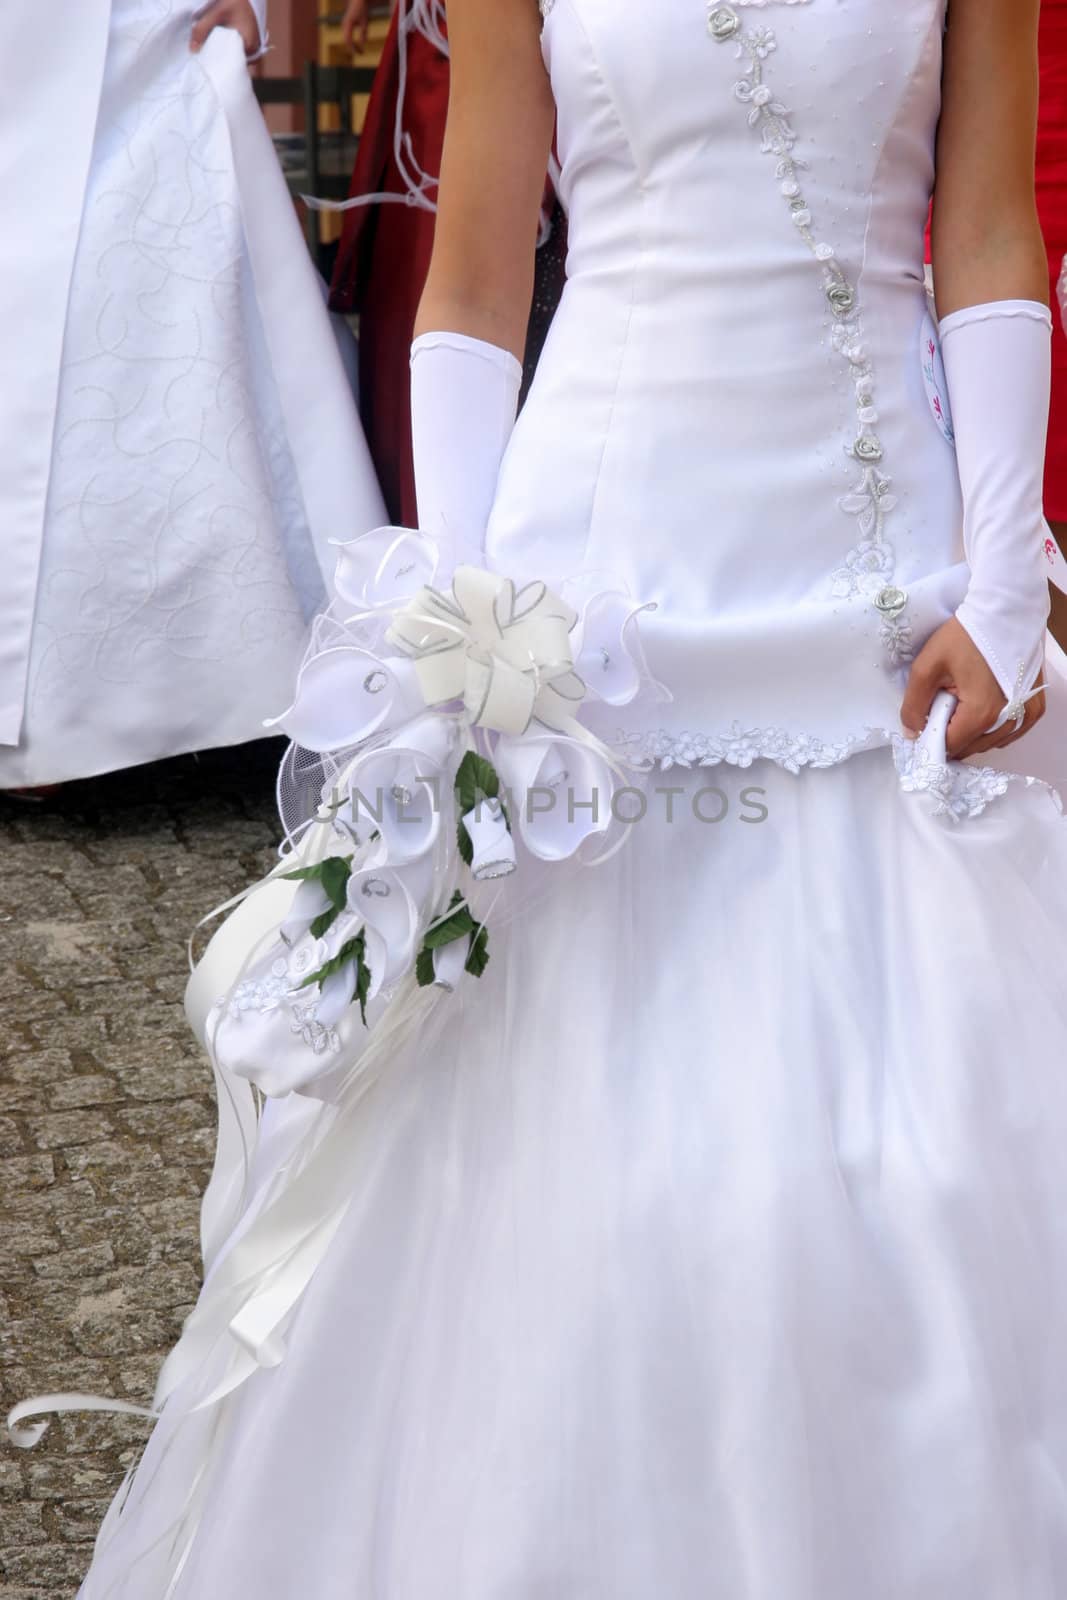 bride in wedding dress and holding bouquet